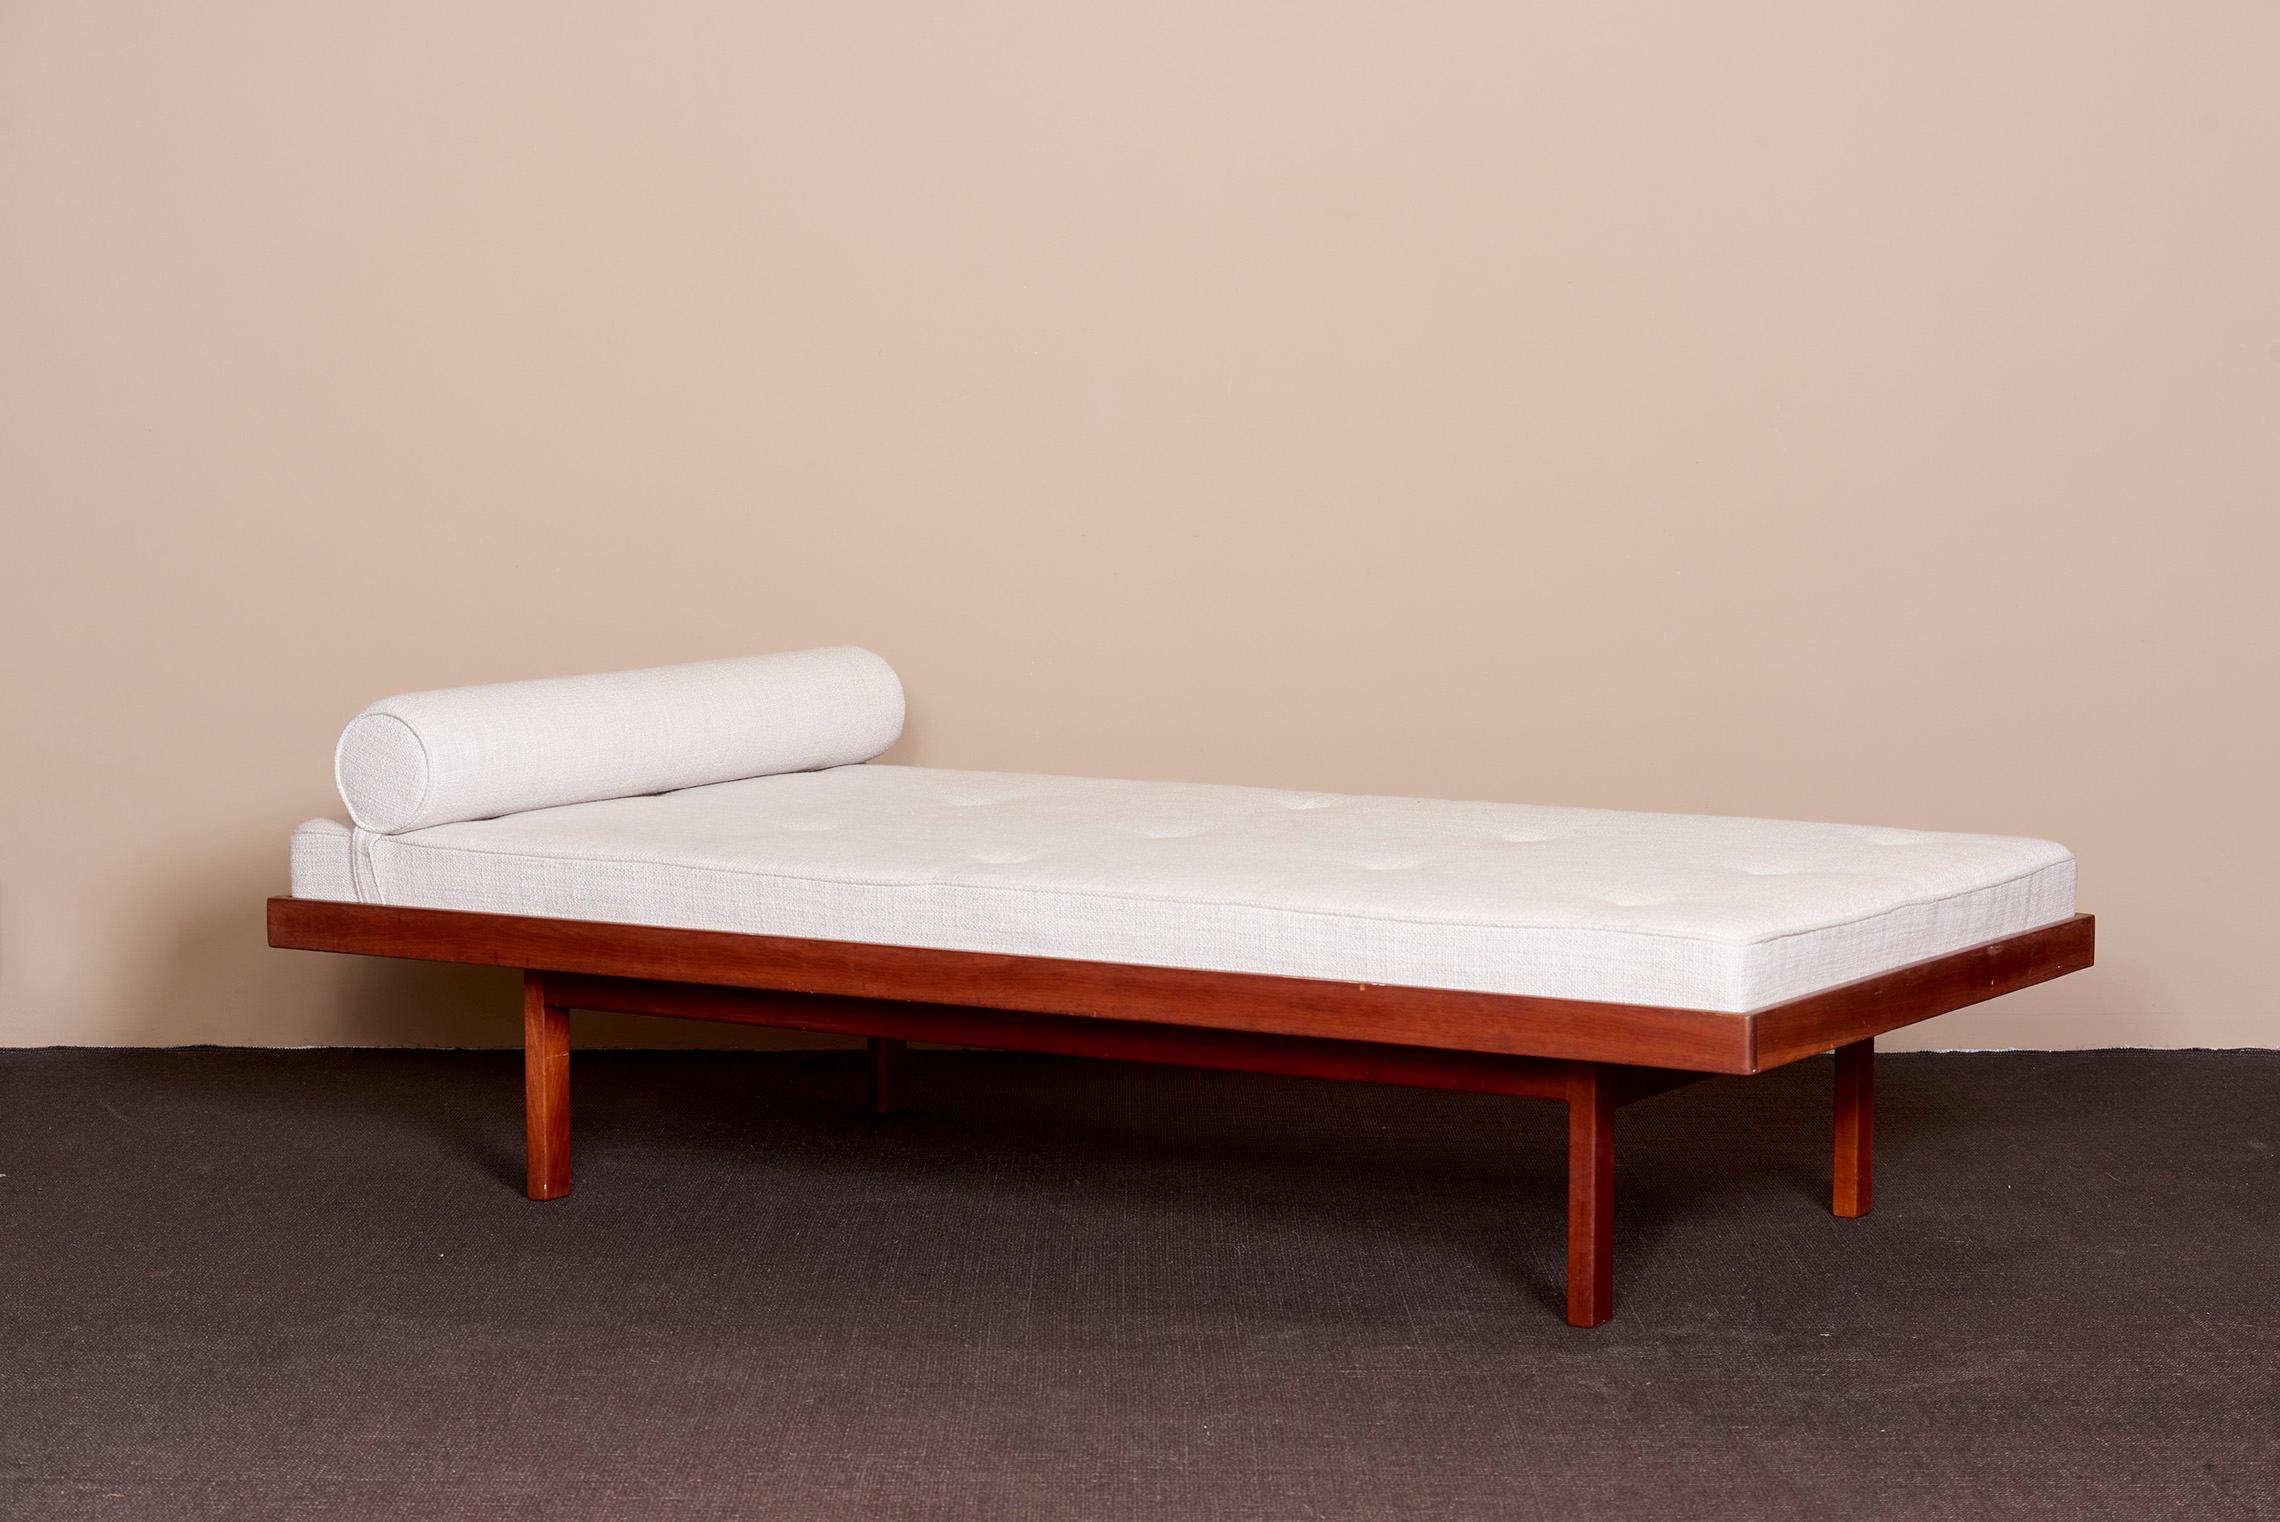 1 of 2 American Studio Walnut Frame Daybeds in Mark Alexander Fabric, US 1960s In Good Condition For Sale In Berlin, DE